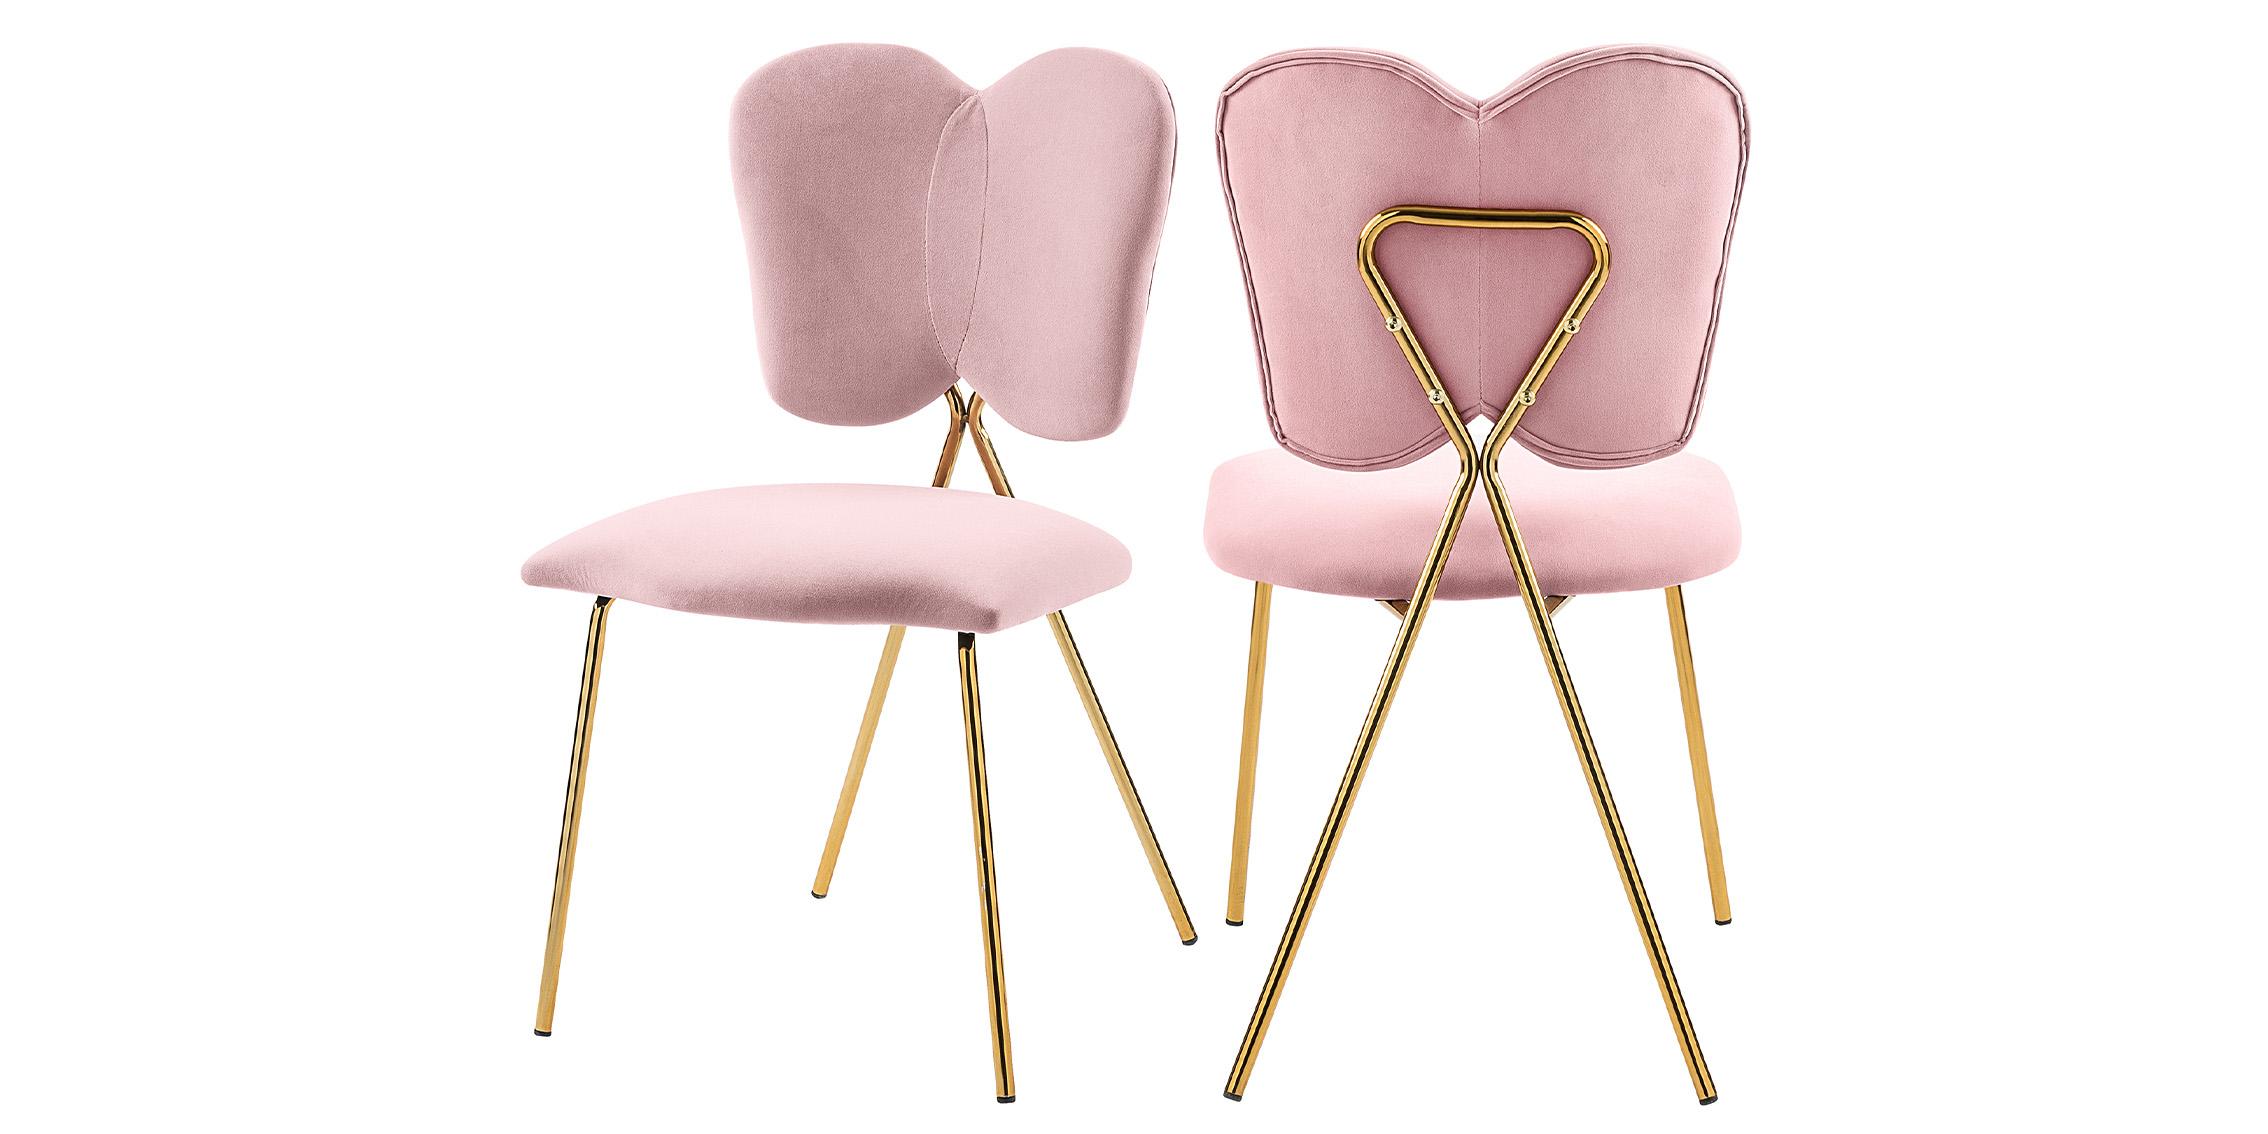 Contemporary, Modern Dining Chair Set ANGEL 780Pink-C 780Pink-C in Pink, Gold Velvet